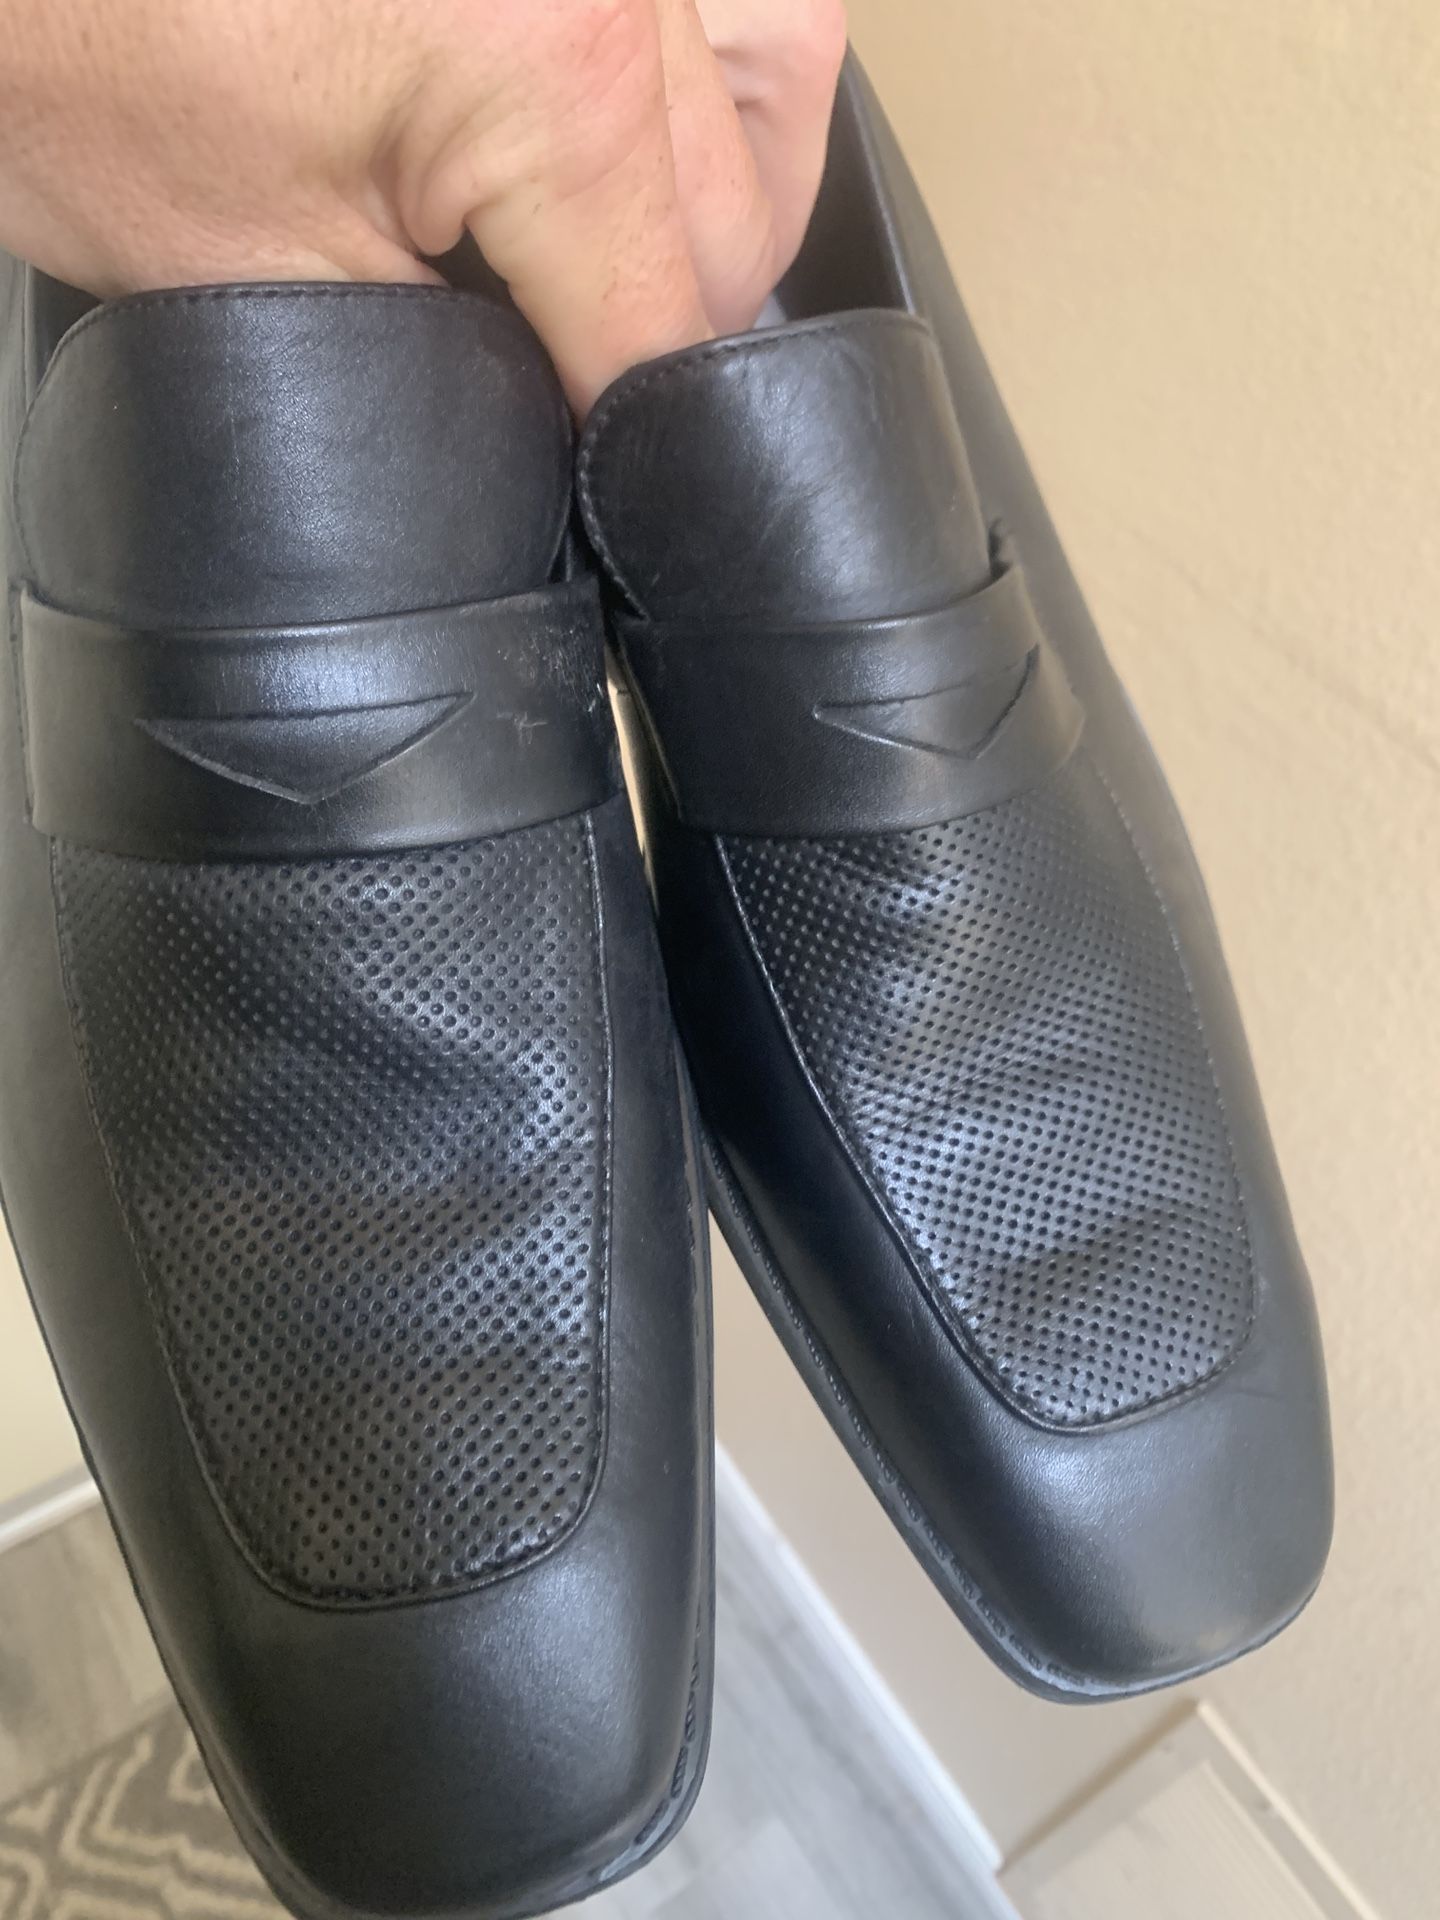 PROM SHOES *KENNETH COLE* SIZE 11